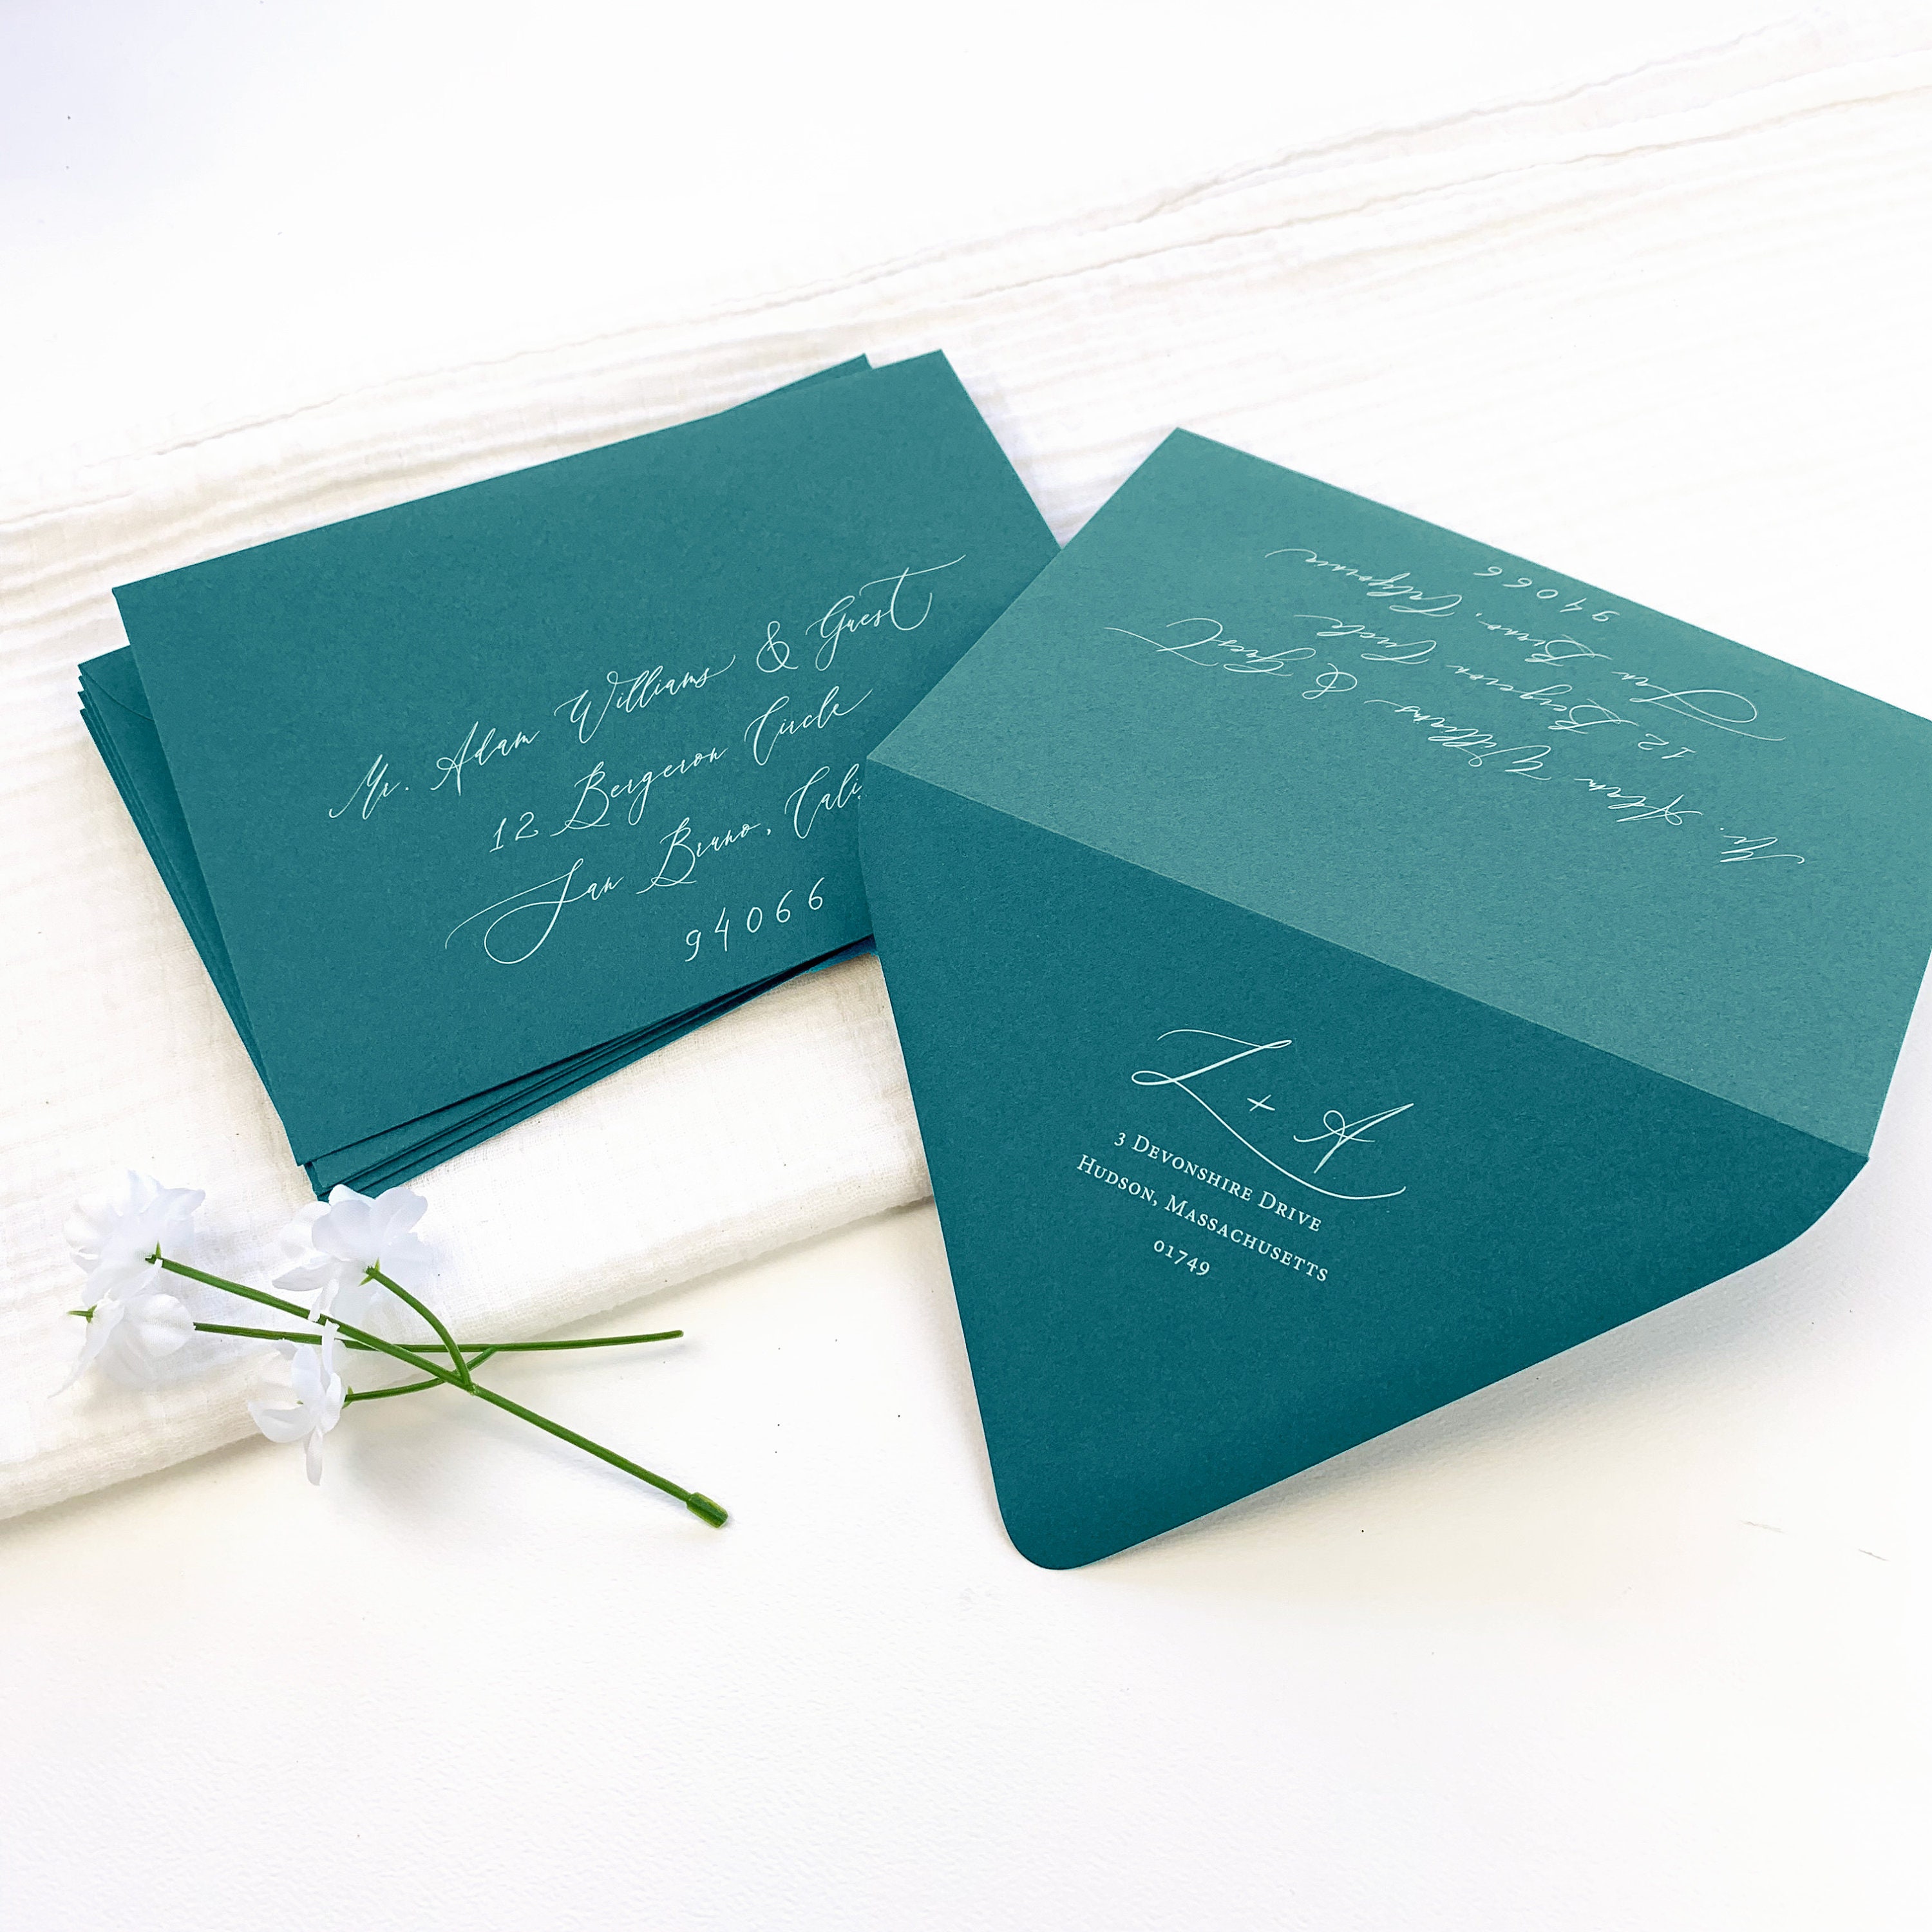 A6 4 1/2 X 6 1/4 Blank Card Stock for DIY Invitations, Save the